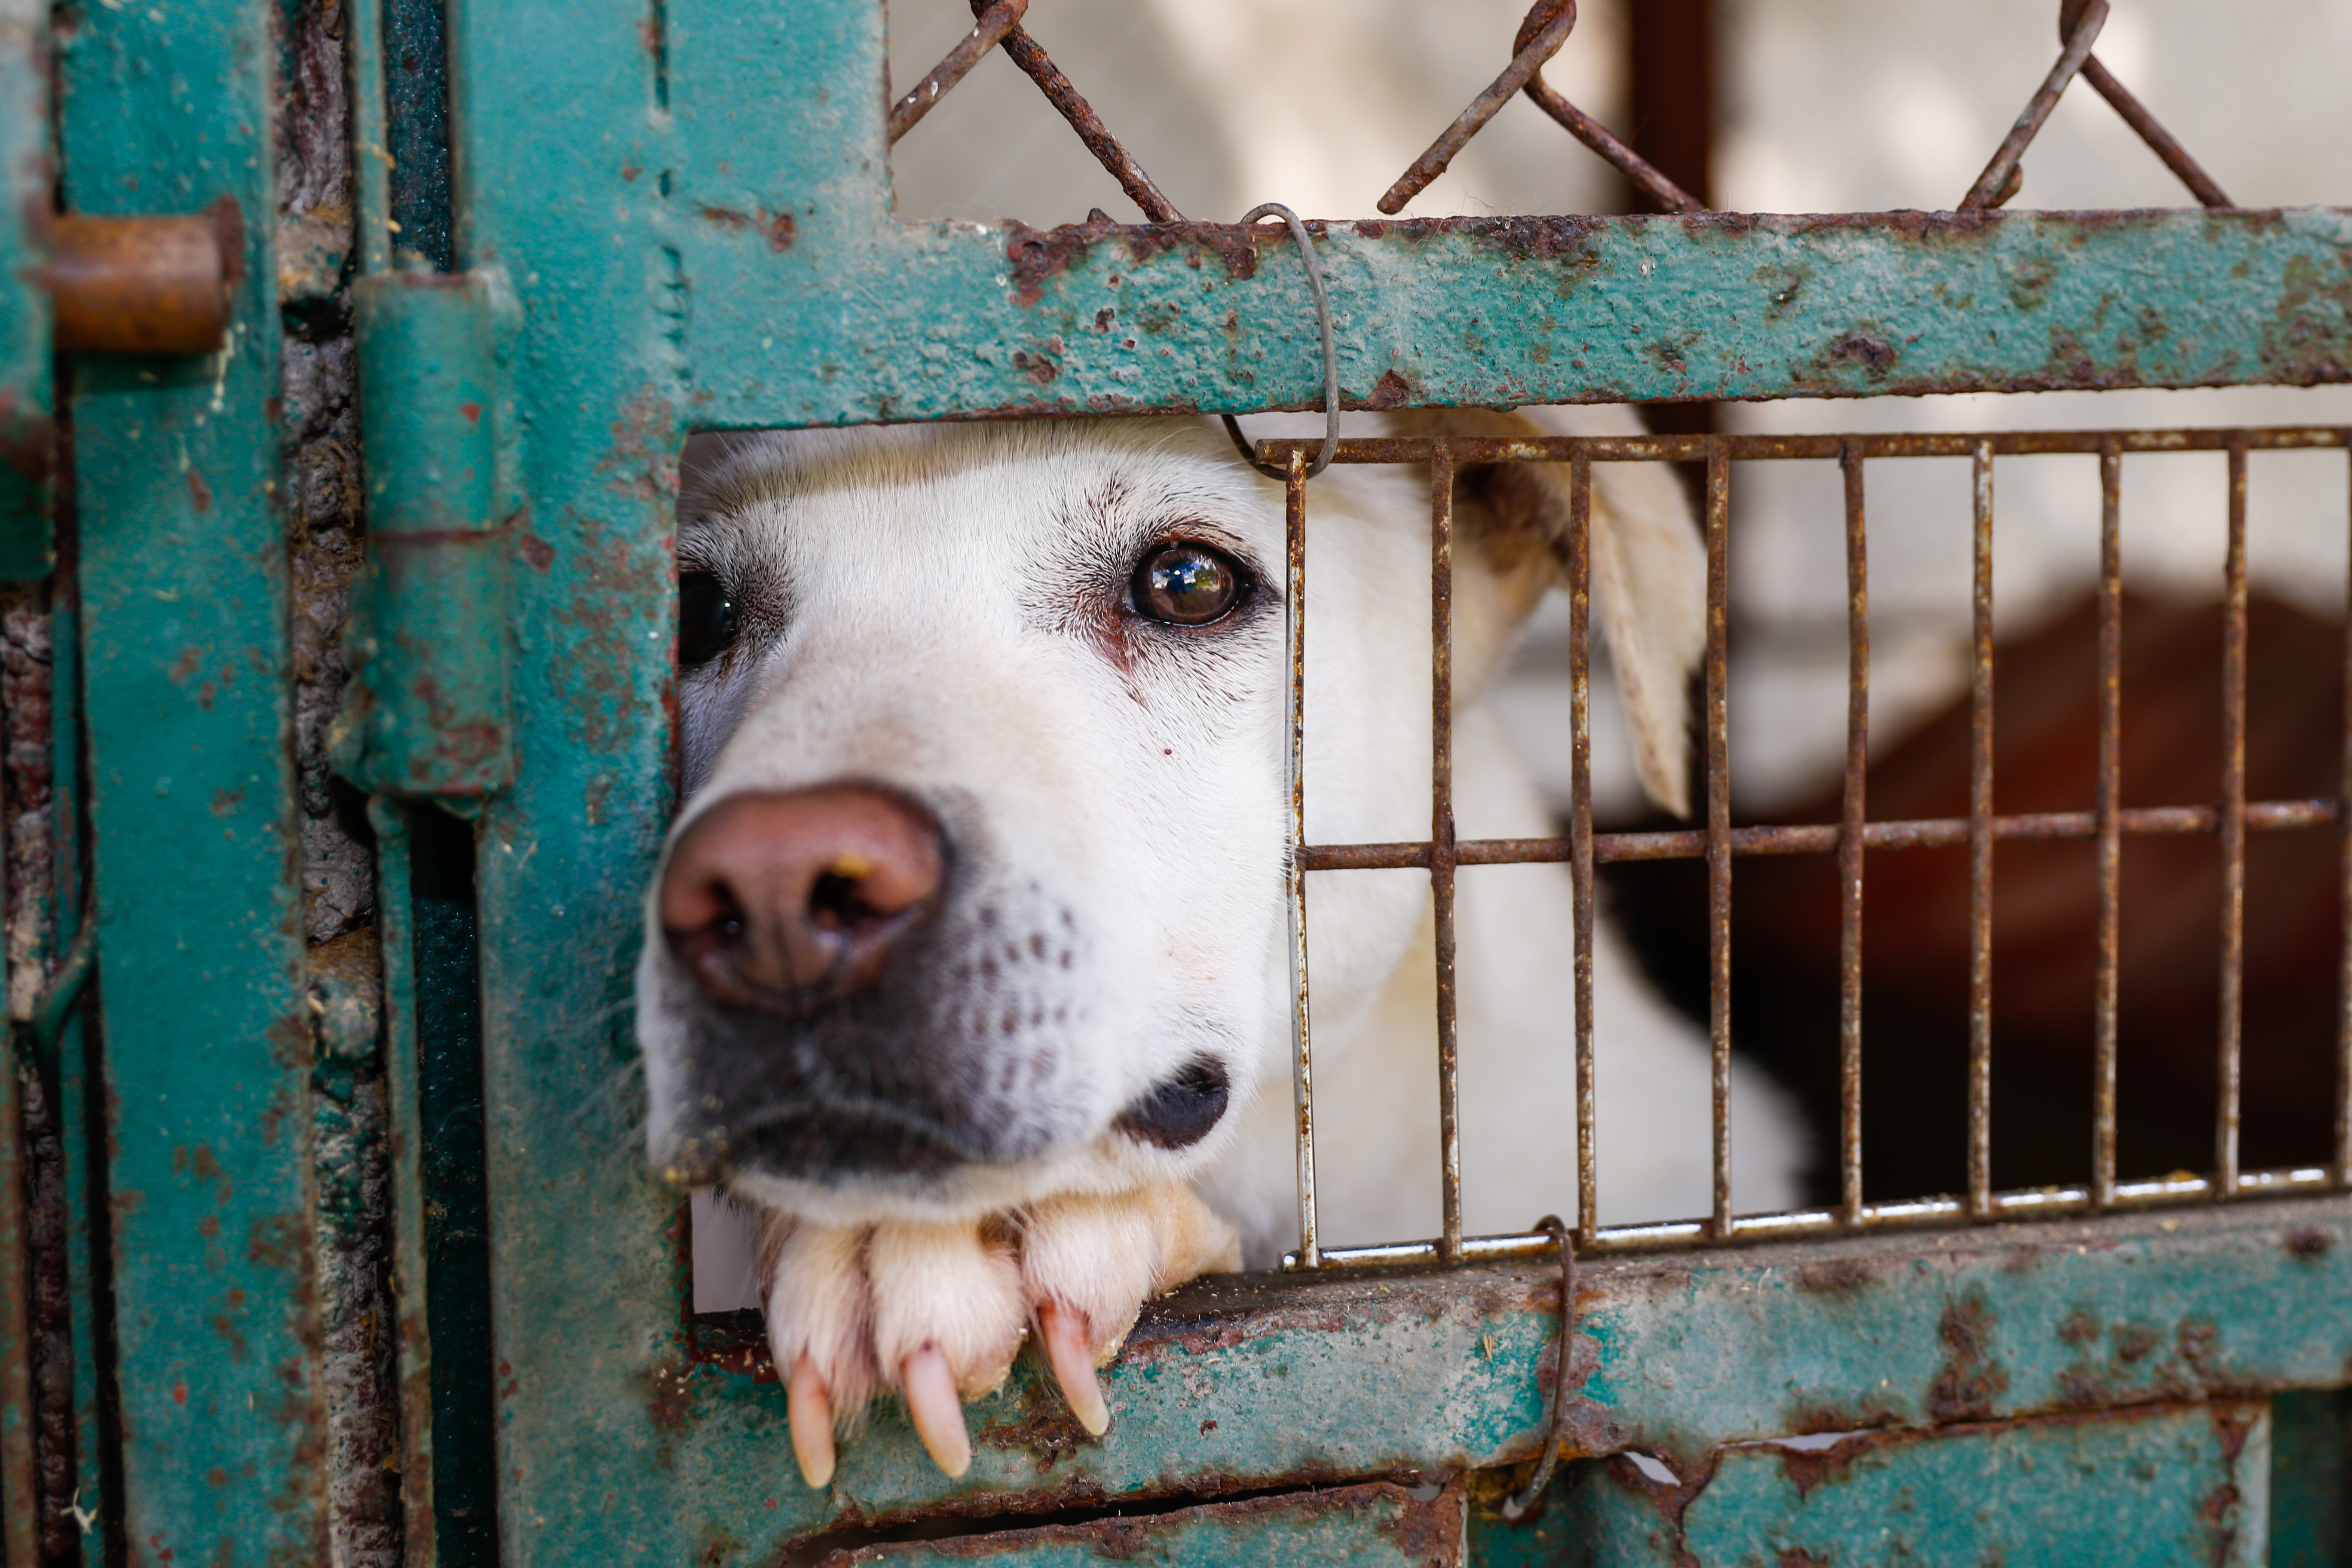 A dogg in a shelter | Source: Getty Images